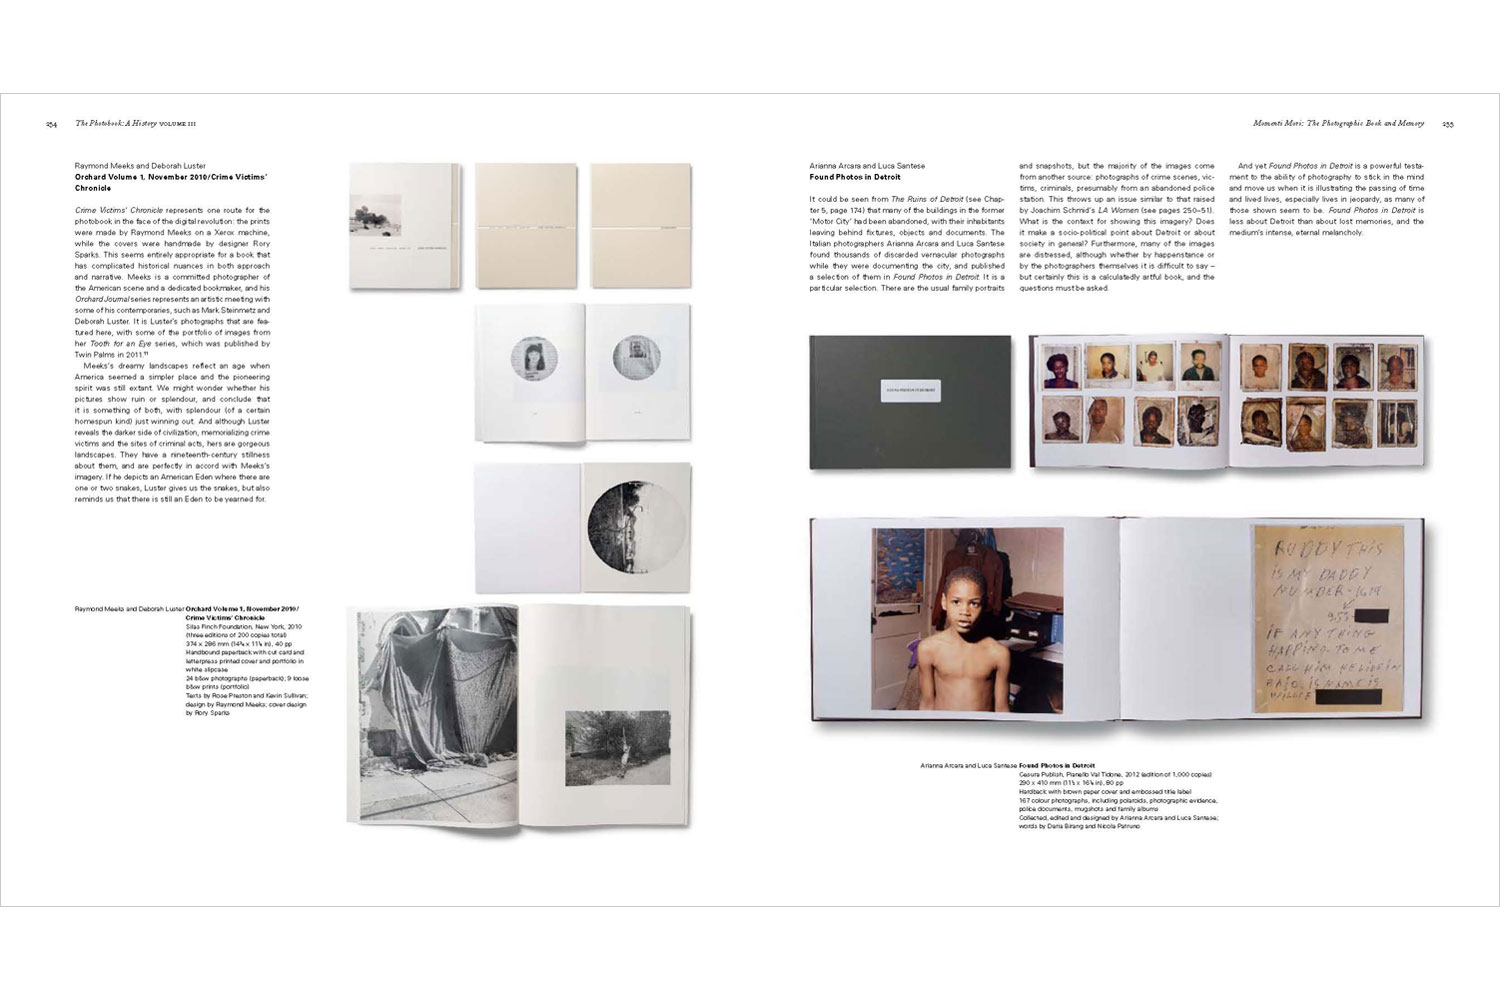 Phaidon's third and final volume in the Photobook: A History series, writter by Marti Parr and Gerry Badger